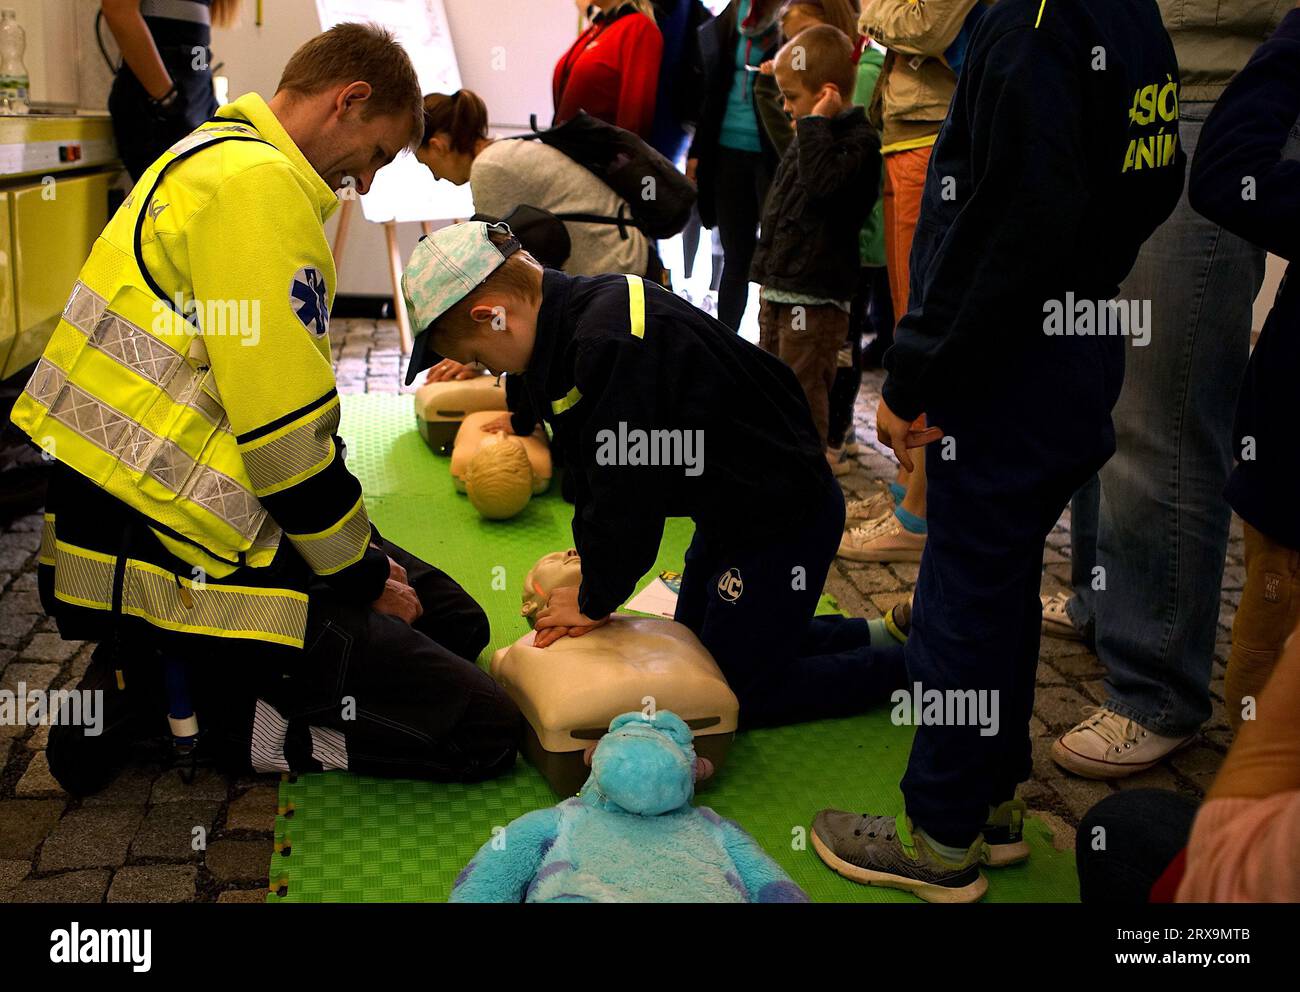 Prague, Czech Republic. 23rd Sep, 2023. A boy tries cardiac resuscitation during the Heroes' Day event in Prague, the Czech Republic, on Sept. 23, 2023. The annual event, which showcases the work of the integrated rescue services in the Czech Republic via exhibits and hands-on activities, took place at the Prague Exhibition Grounds on Saturday. Credit: Dana Kesnerova/Xinhua/Alamy Live News Stock Photo